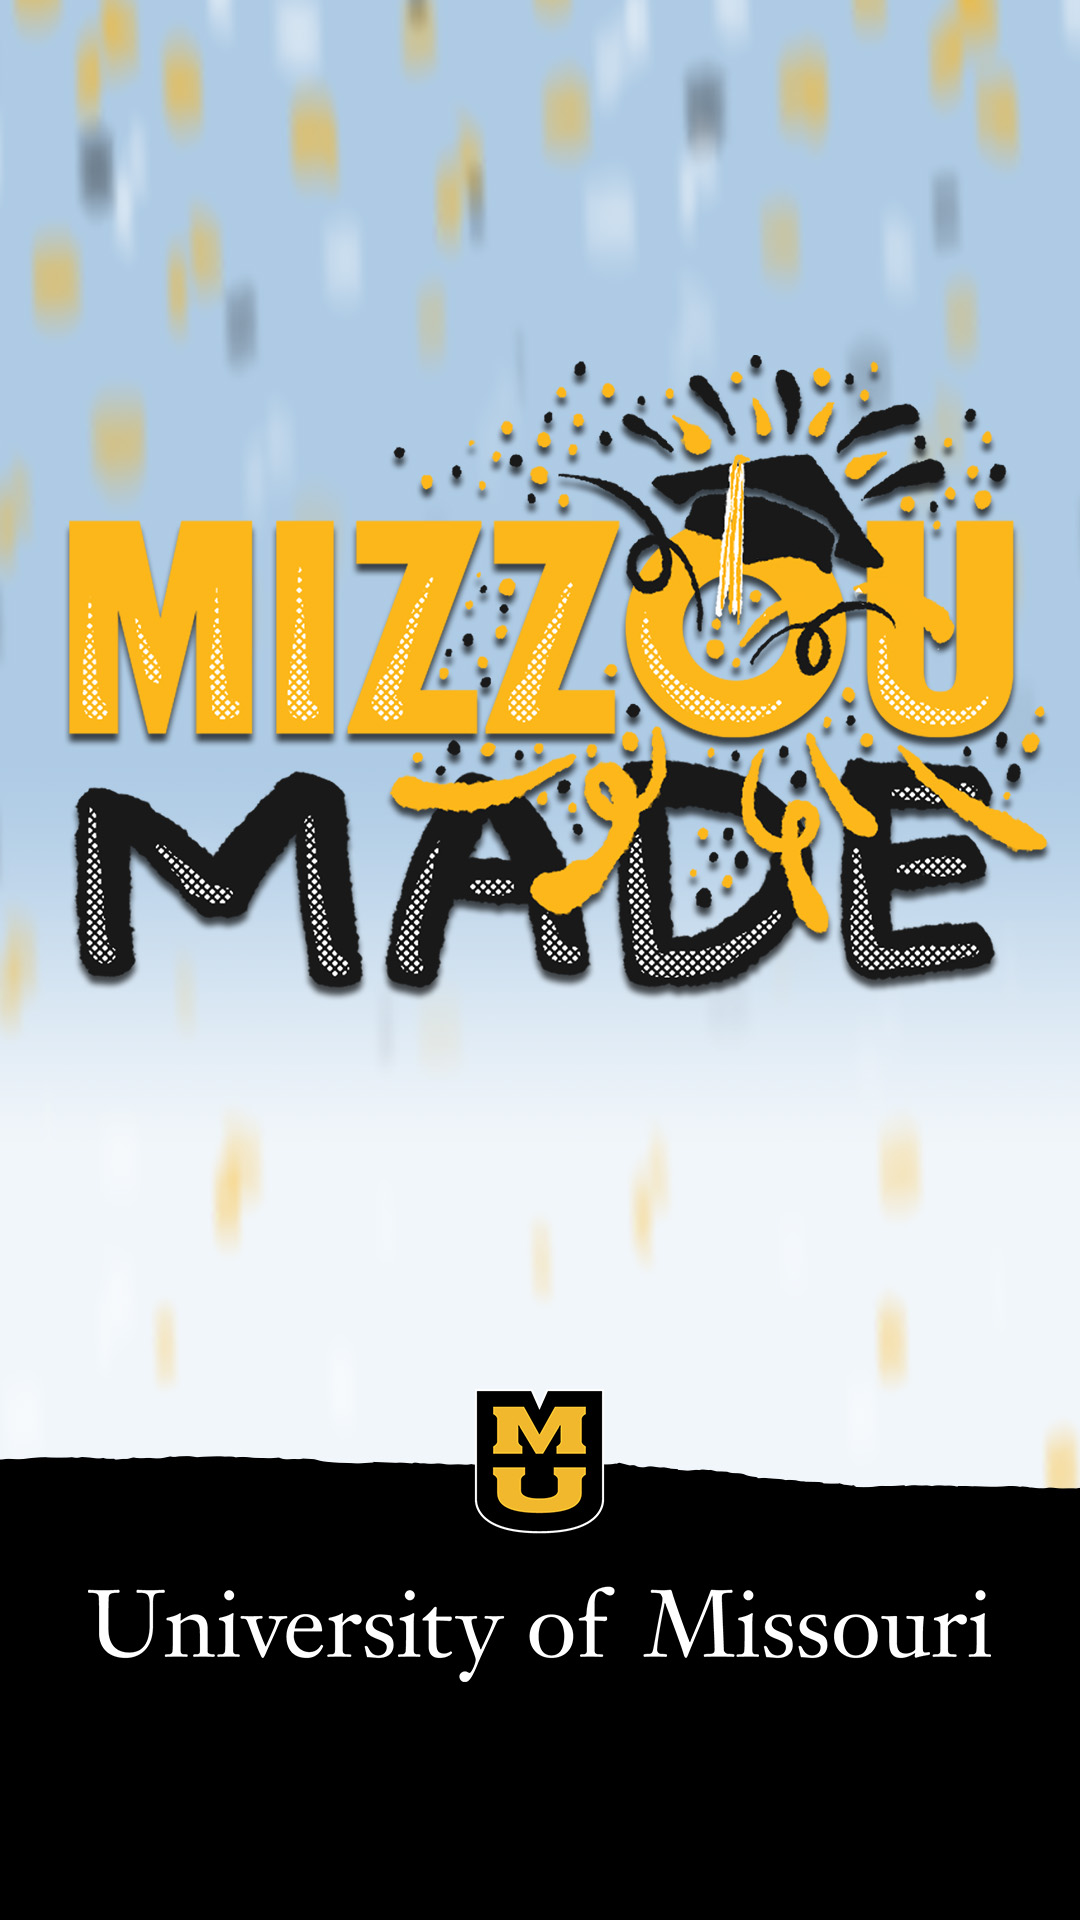 Light blue confetti background with a hand drawn gold bubble “Mizzou” and black “Made” stacked underneath it. The 'o' in the Mizzou has a graduation cap with confetti shooting out. The bottom half looks like a ripped black page with the University of Missouri logo